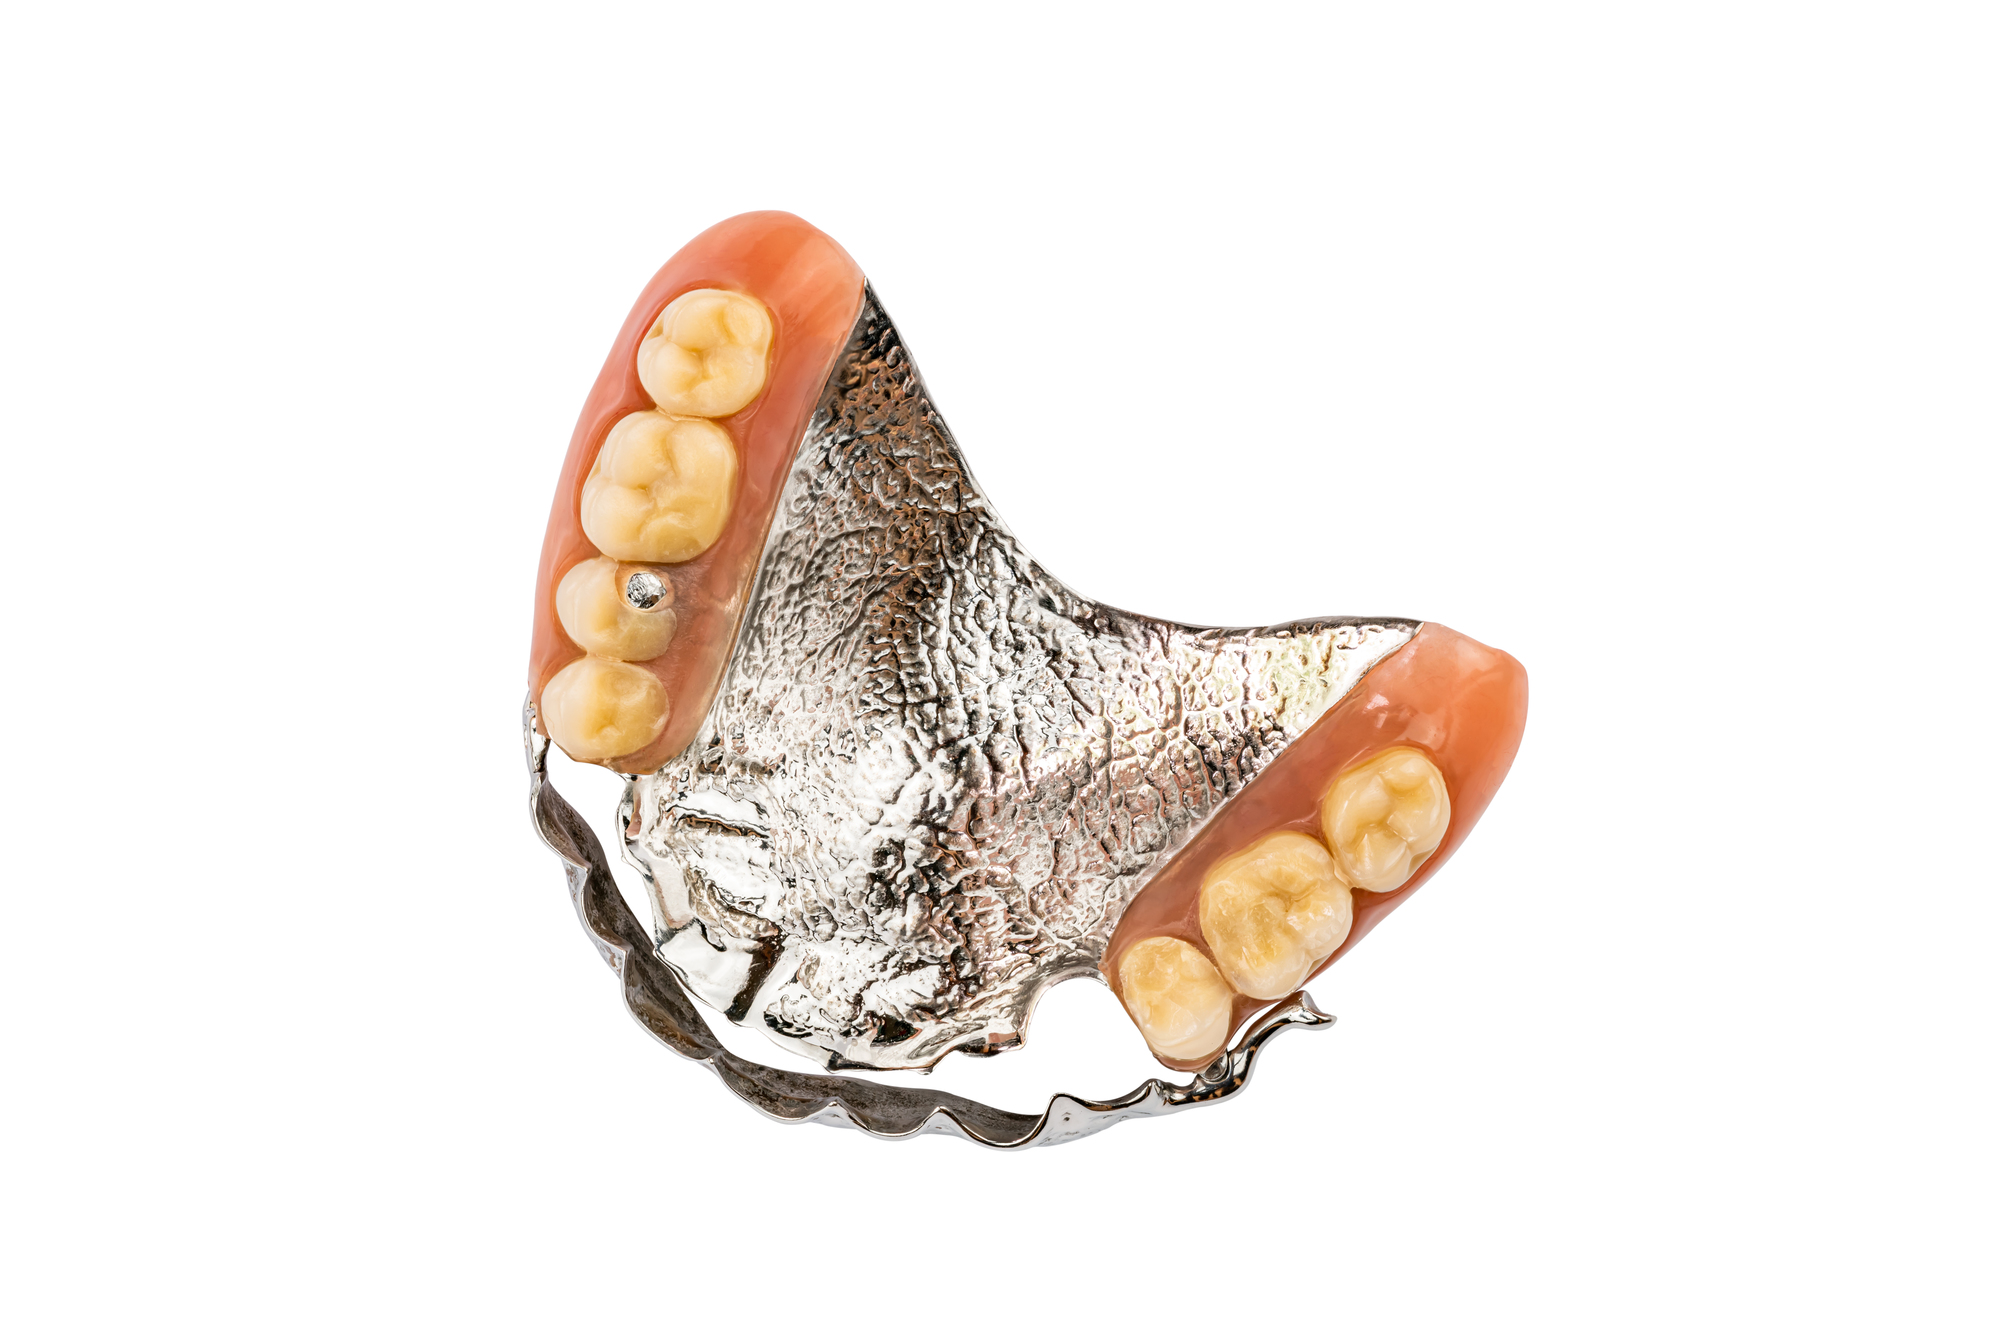 Top view of partial metal removable swinglock denture on white background with clipping path.